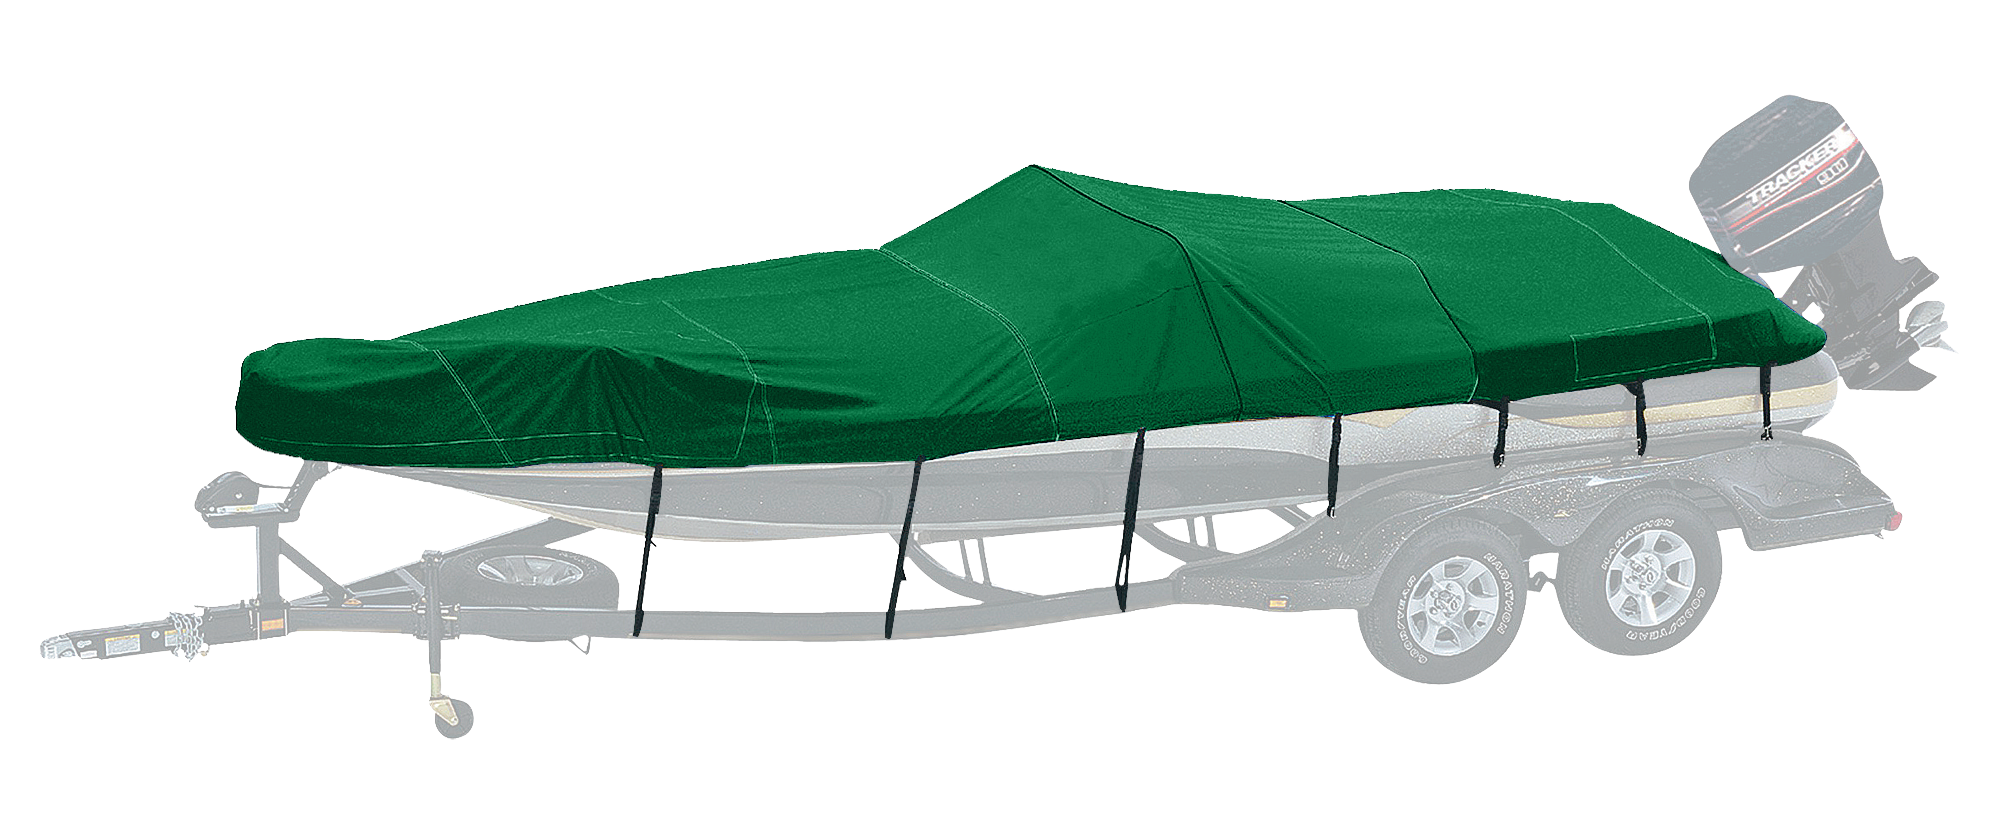 Bass Pro Shops Exact Fit Boat Cover by Westland - Tahoe Boats - 2005 195 Deckboat I/O - Forest Green